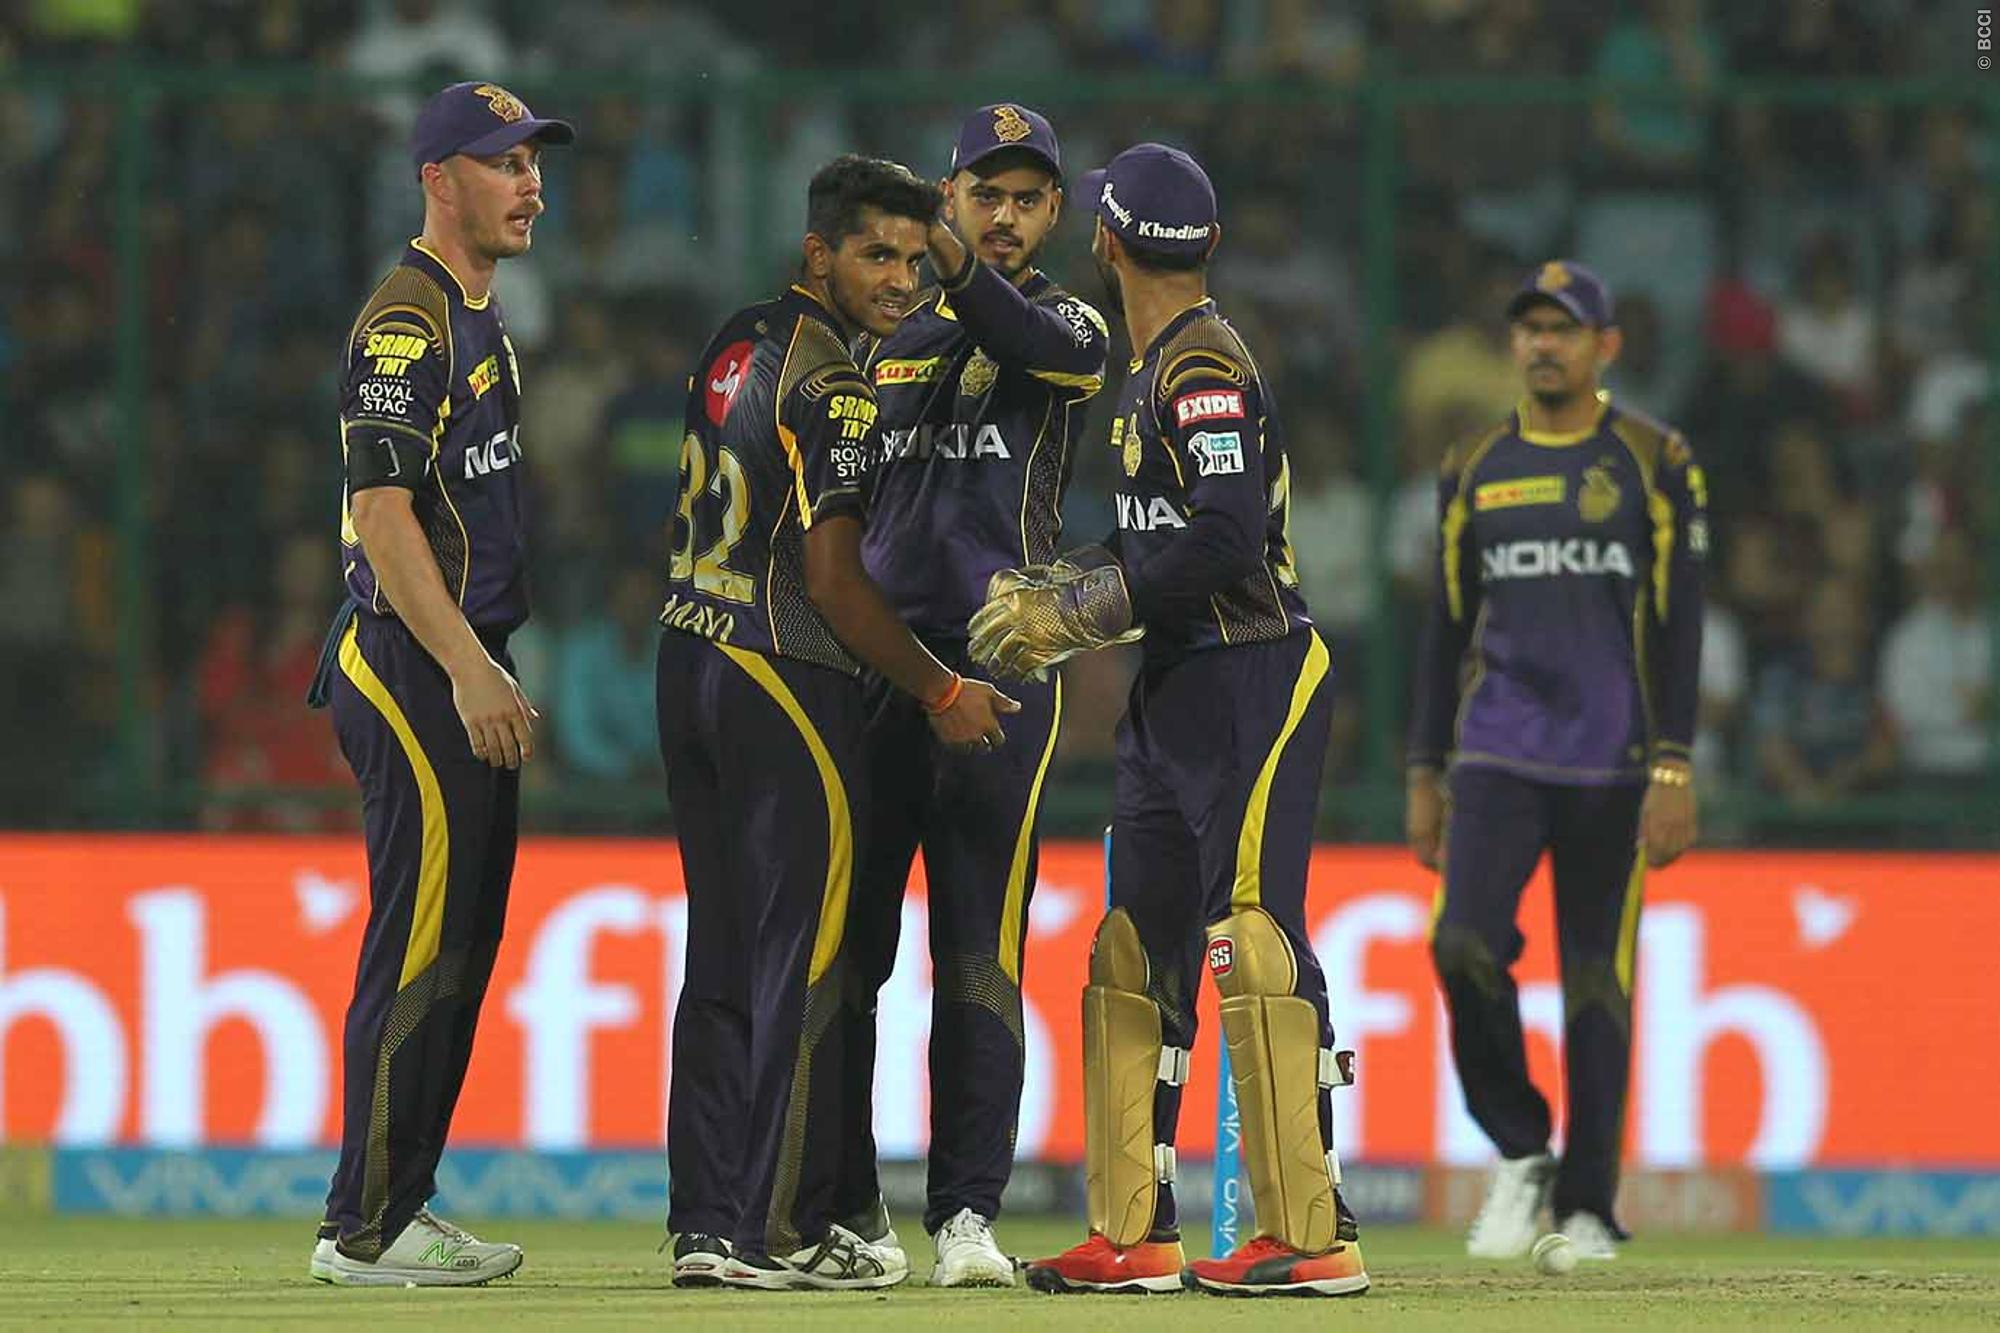 KKR - a team that has multiple problems but zero solutions